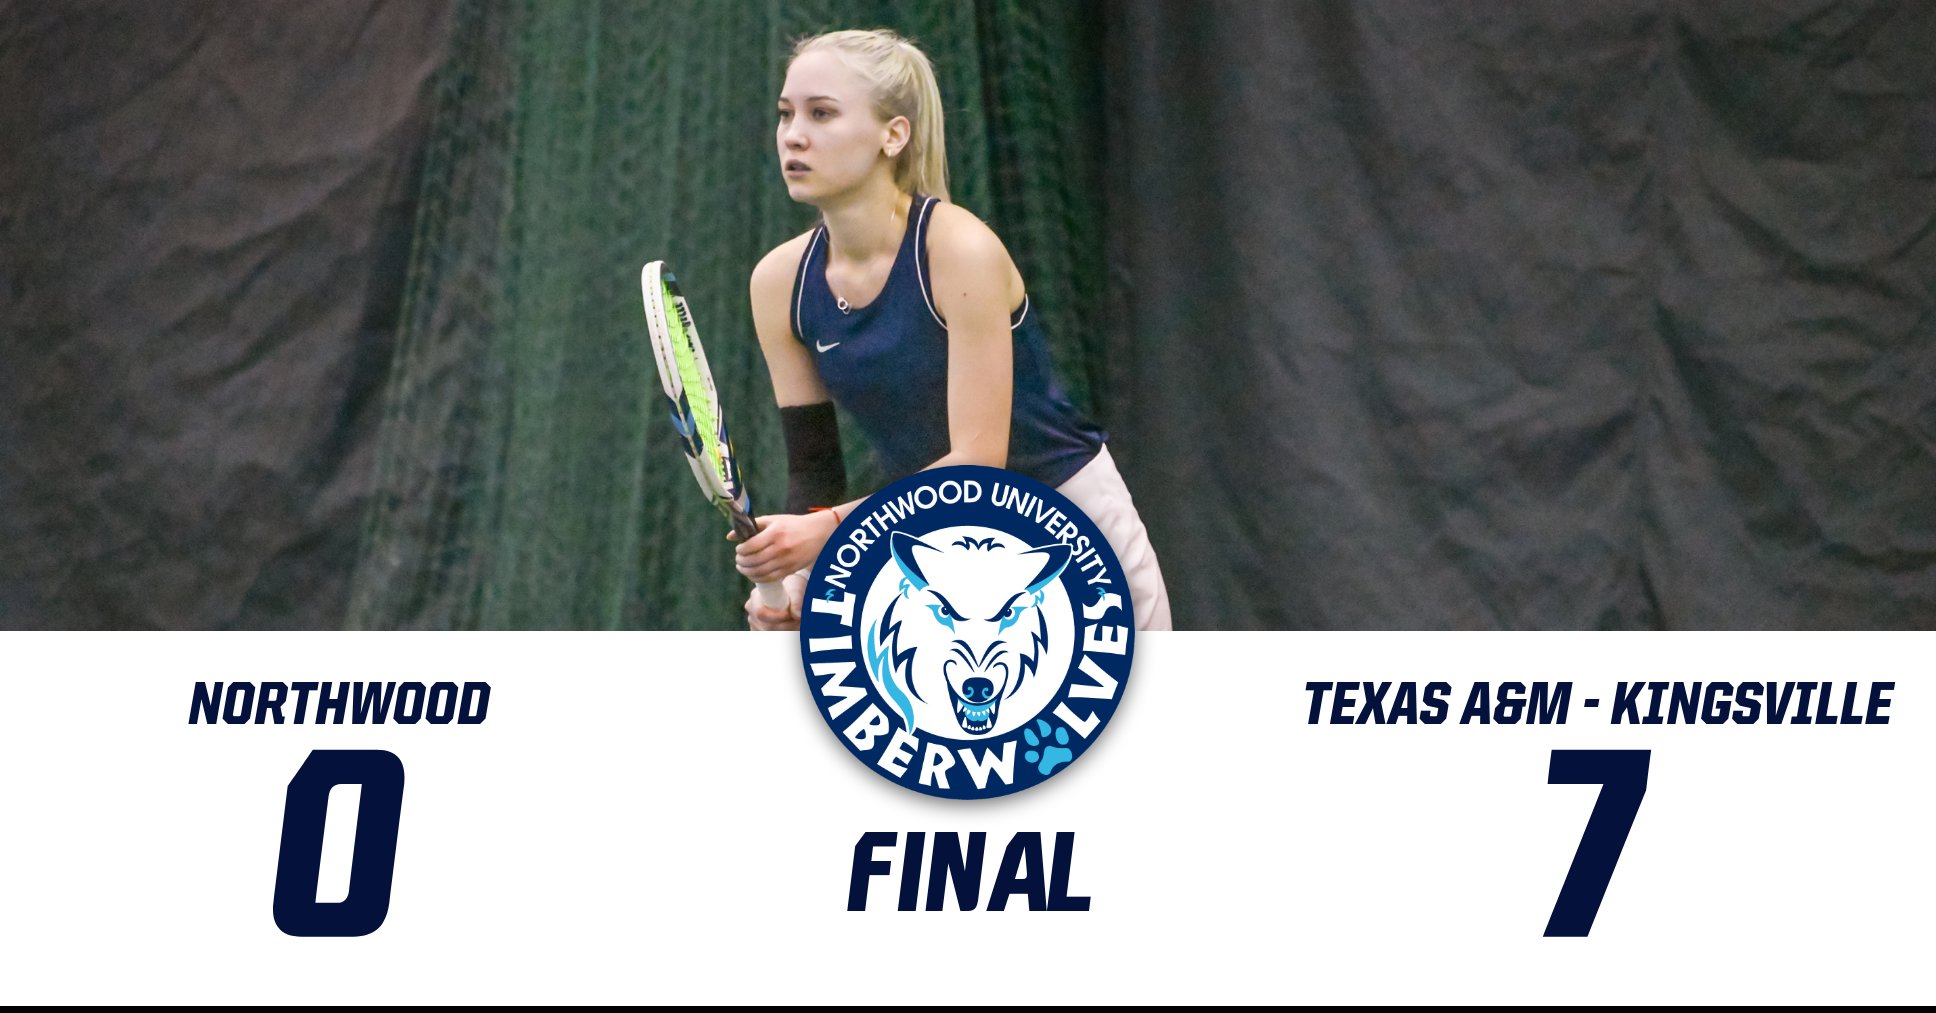 Women's Tennis Loses To Texas A&M - Kingsville 7-0